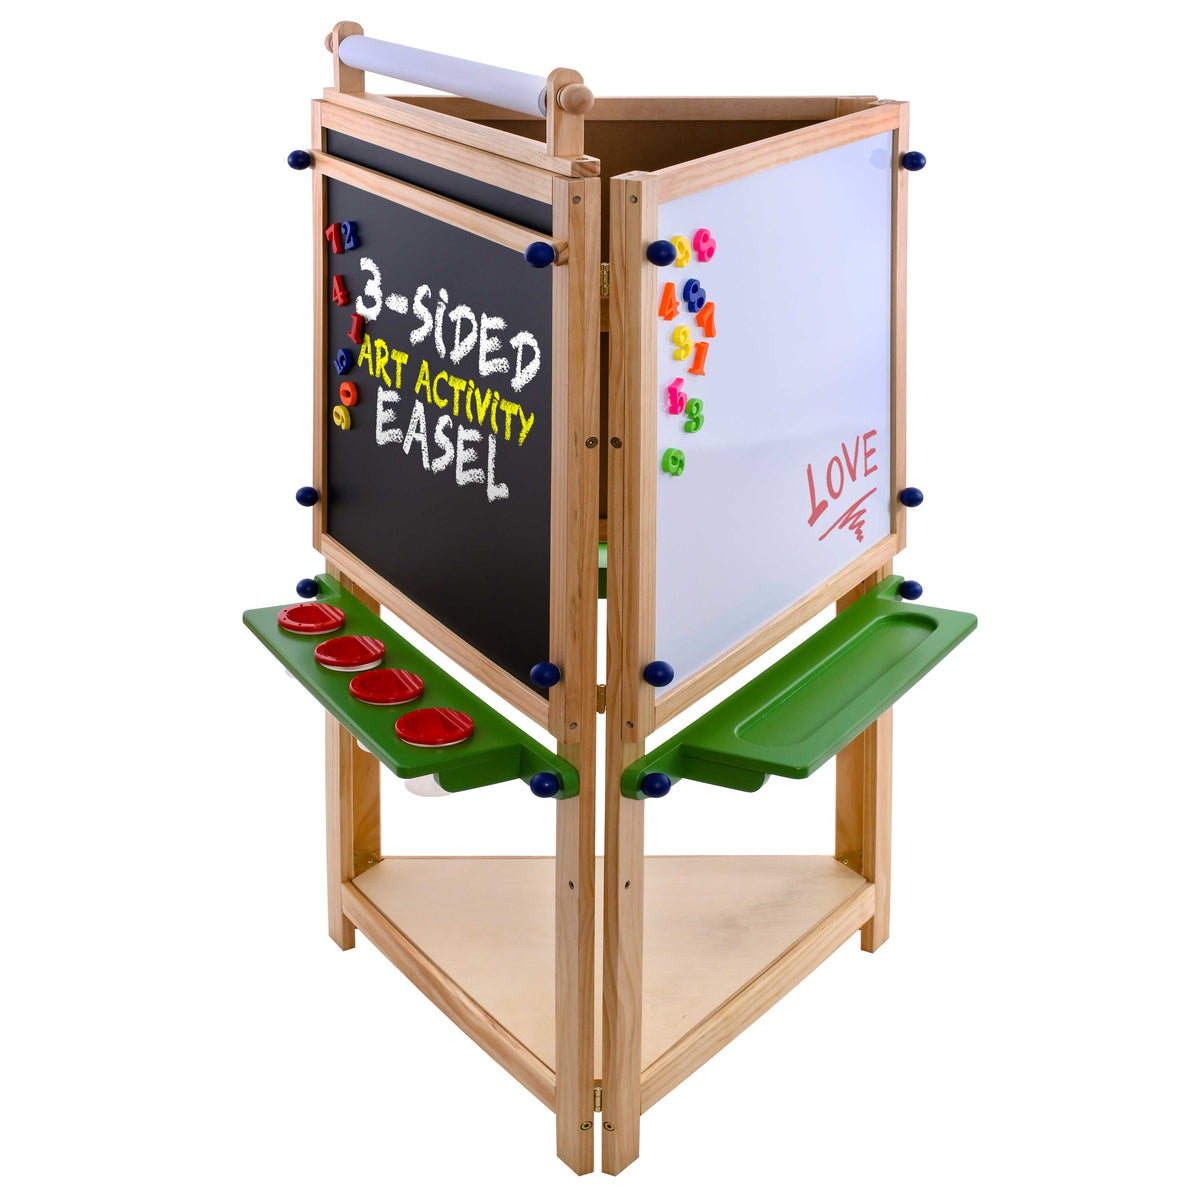  AVIASWIN Wooden Art Easel for Kids 3 Years and Up